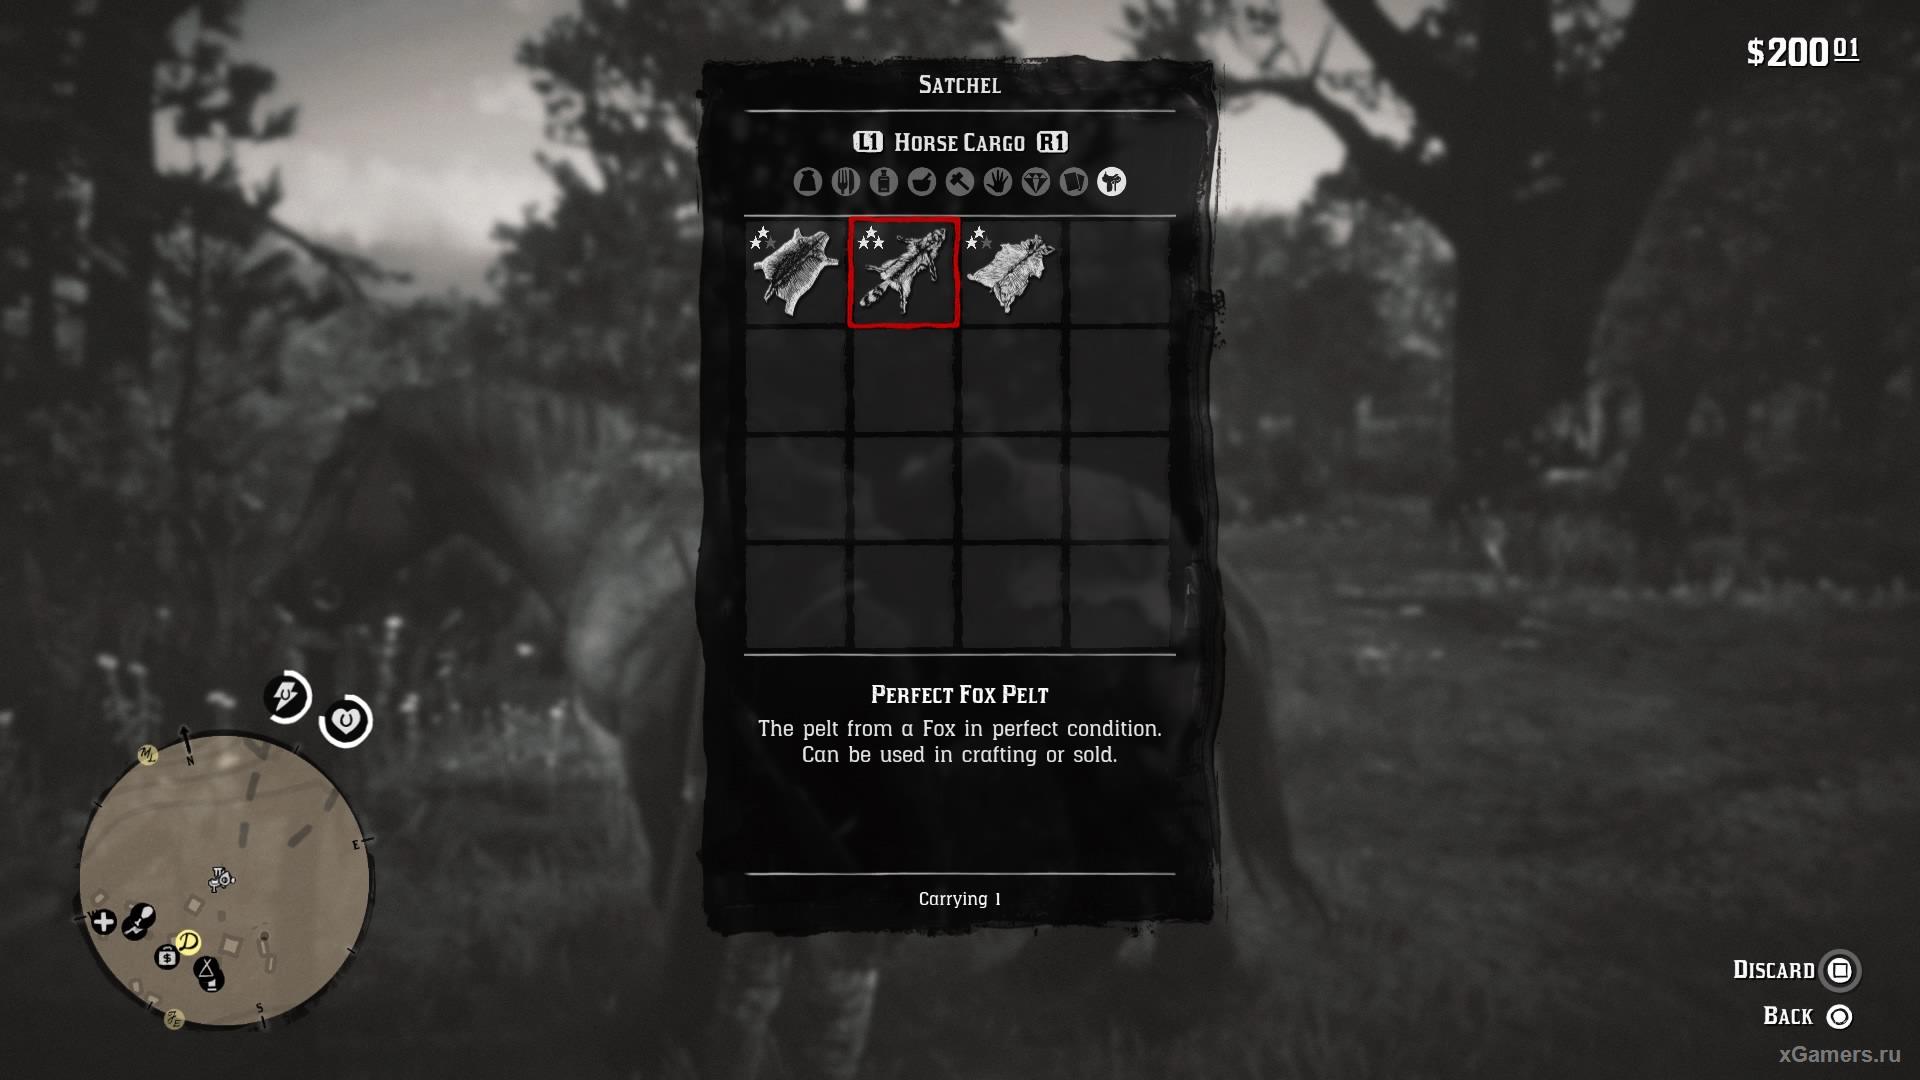 Rdr 2 - full guide to the bags in the game